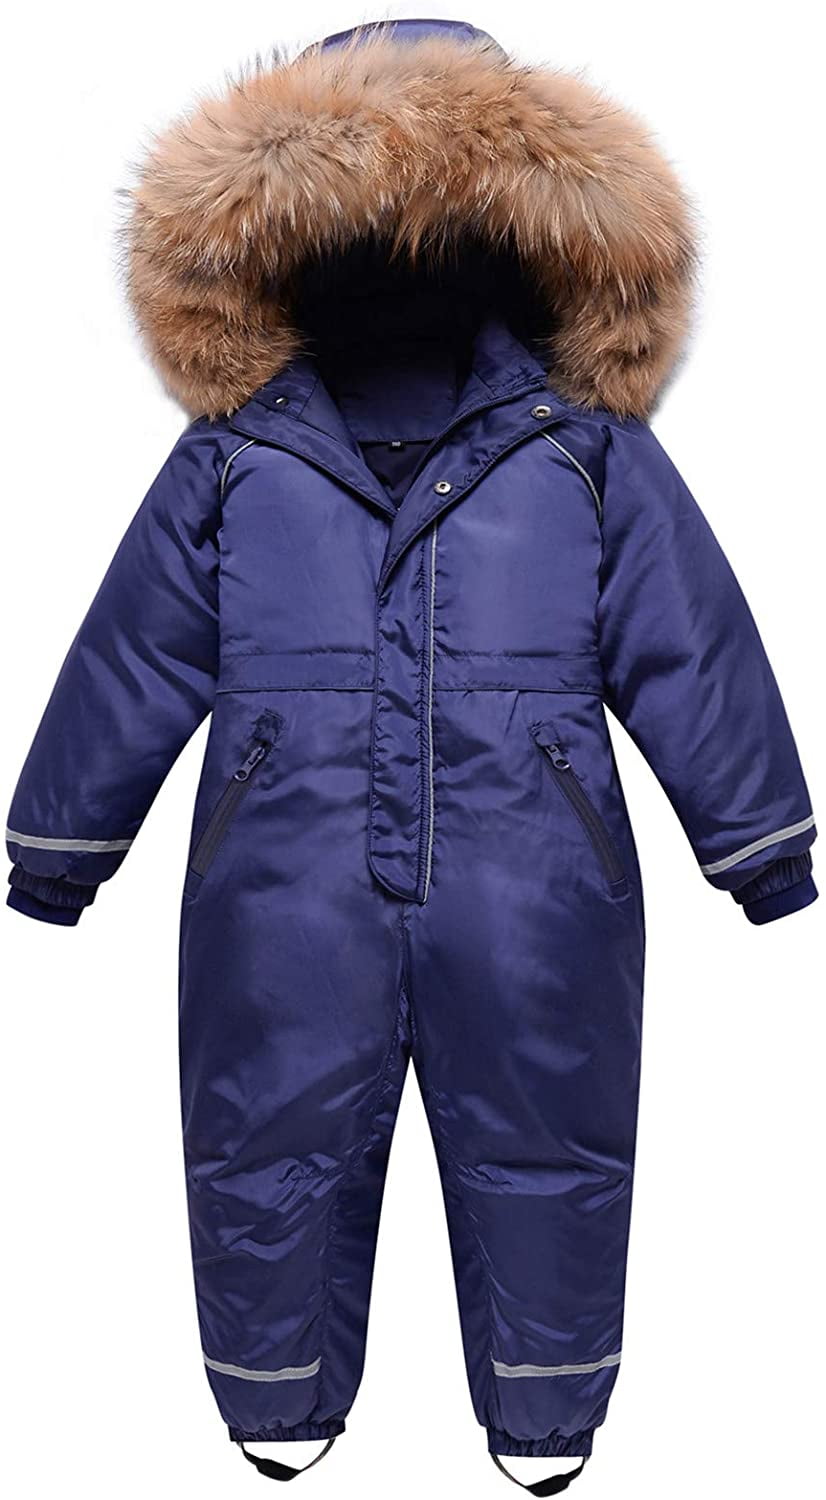 Overalls Ski Suits Jackets Coats Jumpsuits Winter Outdoor Clothes 4-5 Years Kids One Piece Snowsuit 